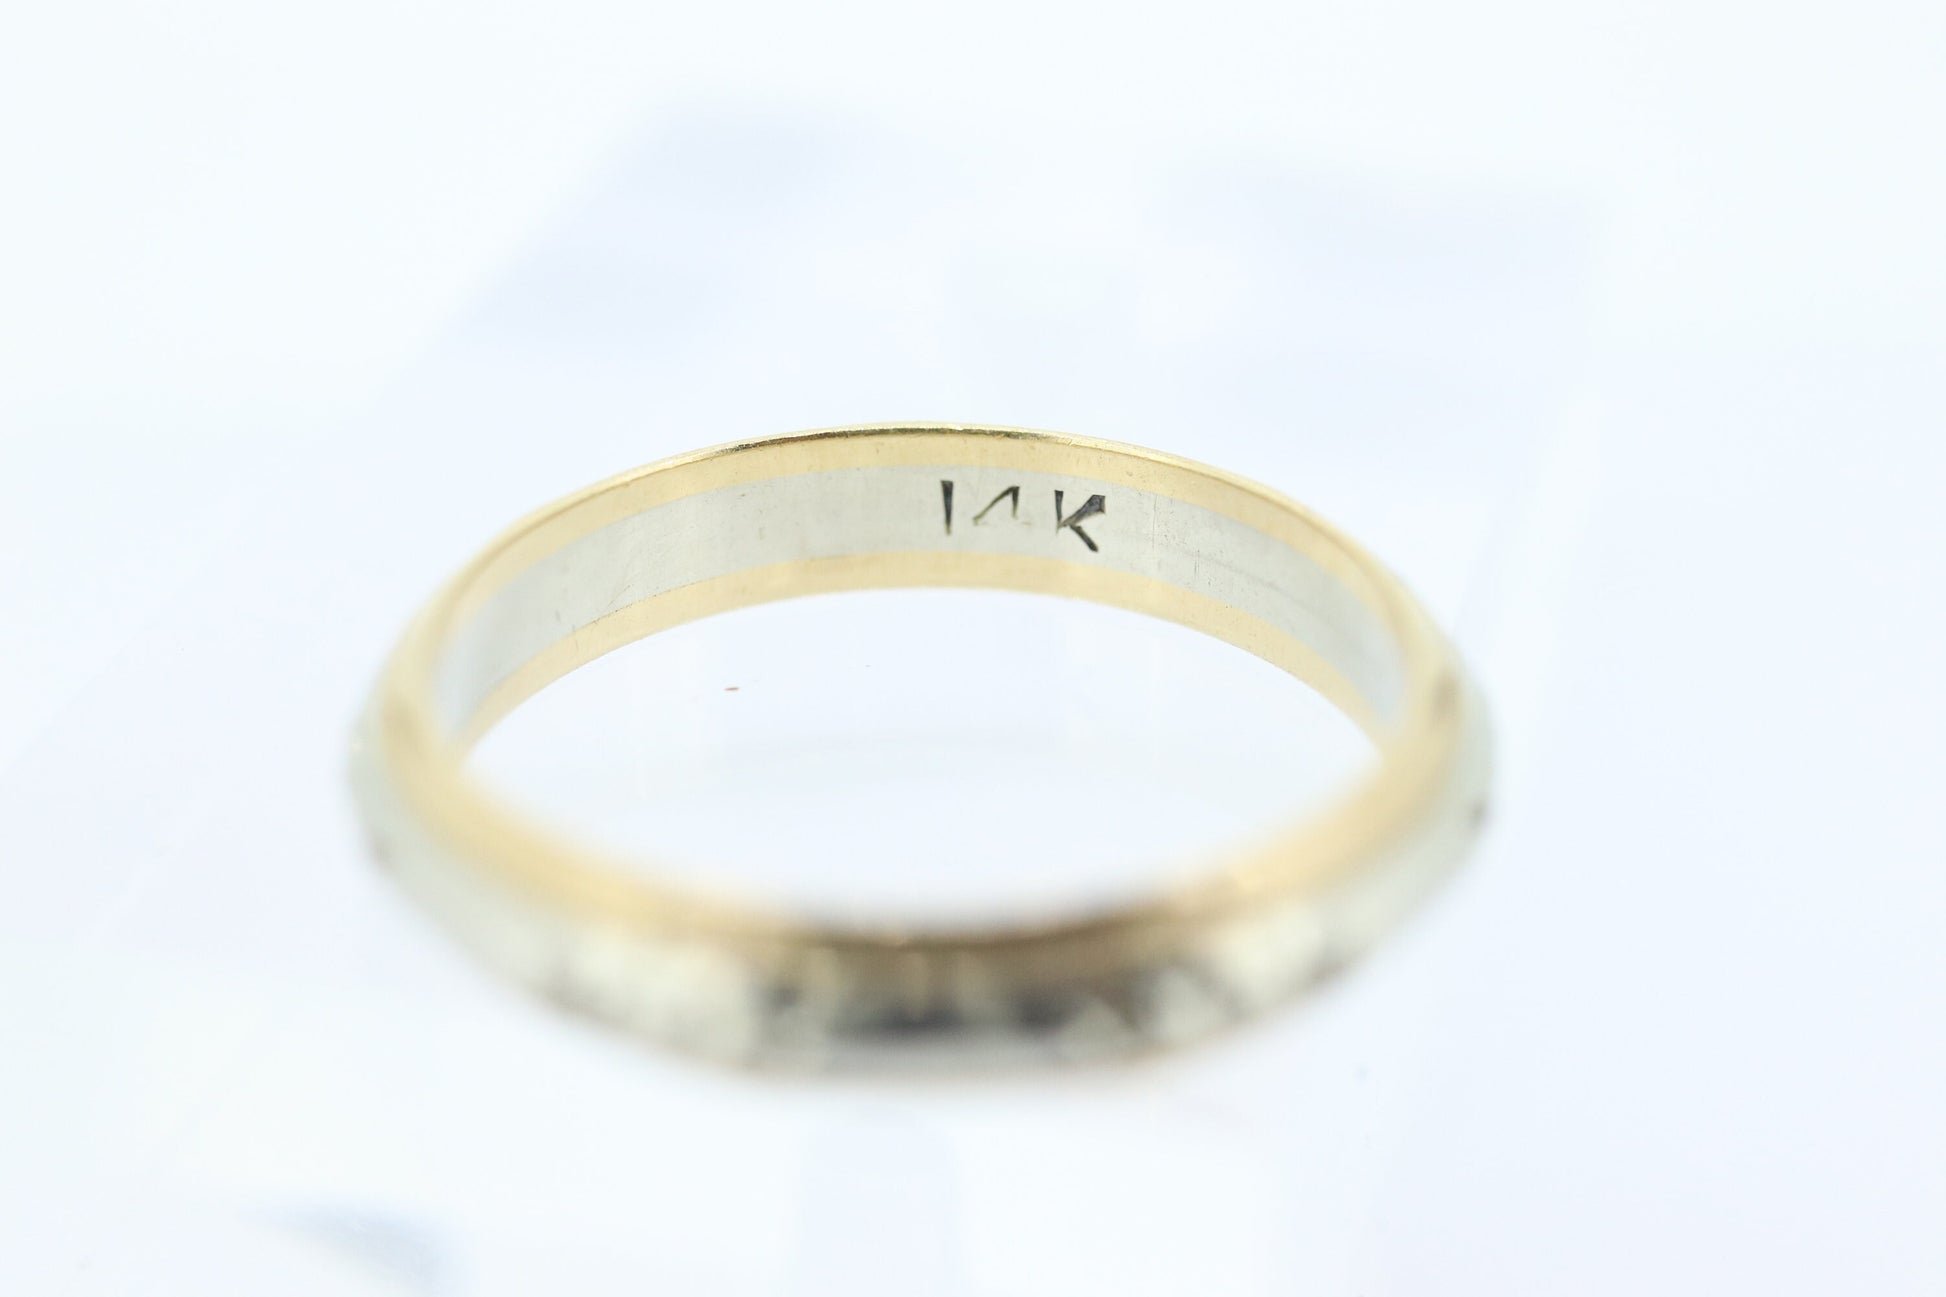 sz11 Engraved Gold band. 14k Two Tone White and Yellow wedding band. Stackable ring. Vintage 1940s. Tu-tone band. st(161/11)